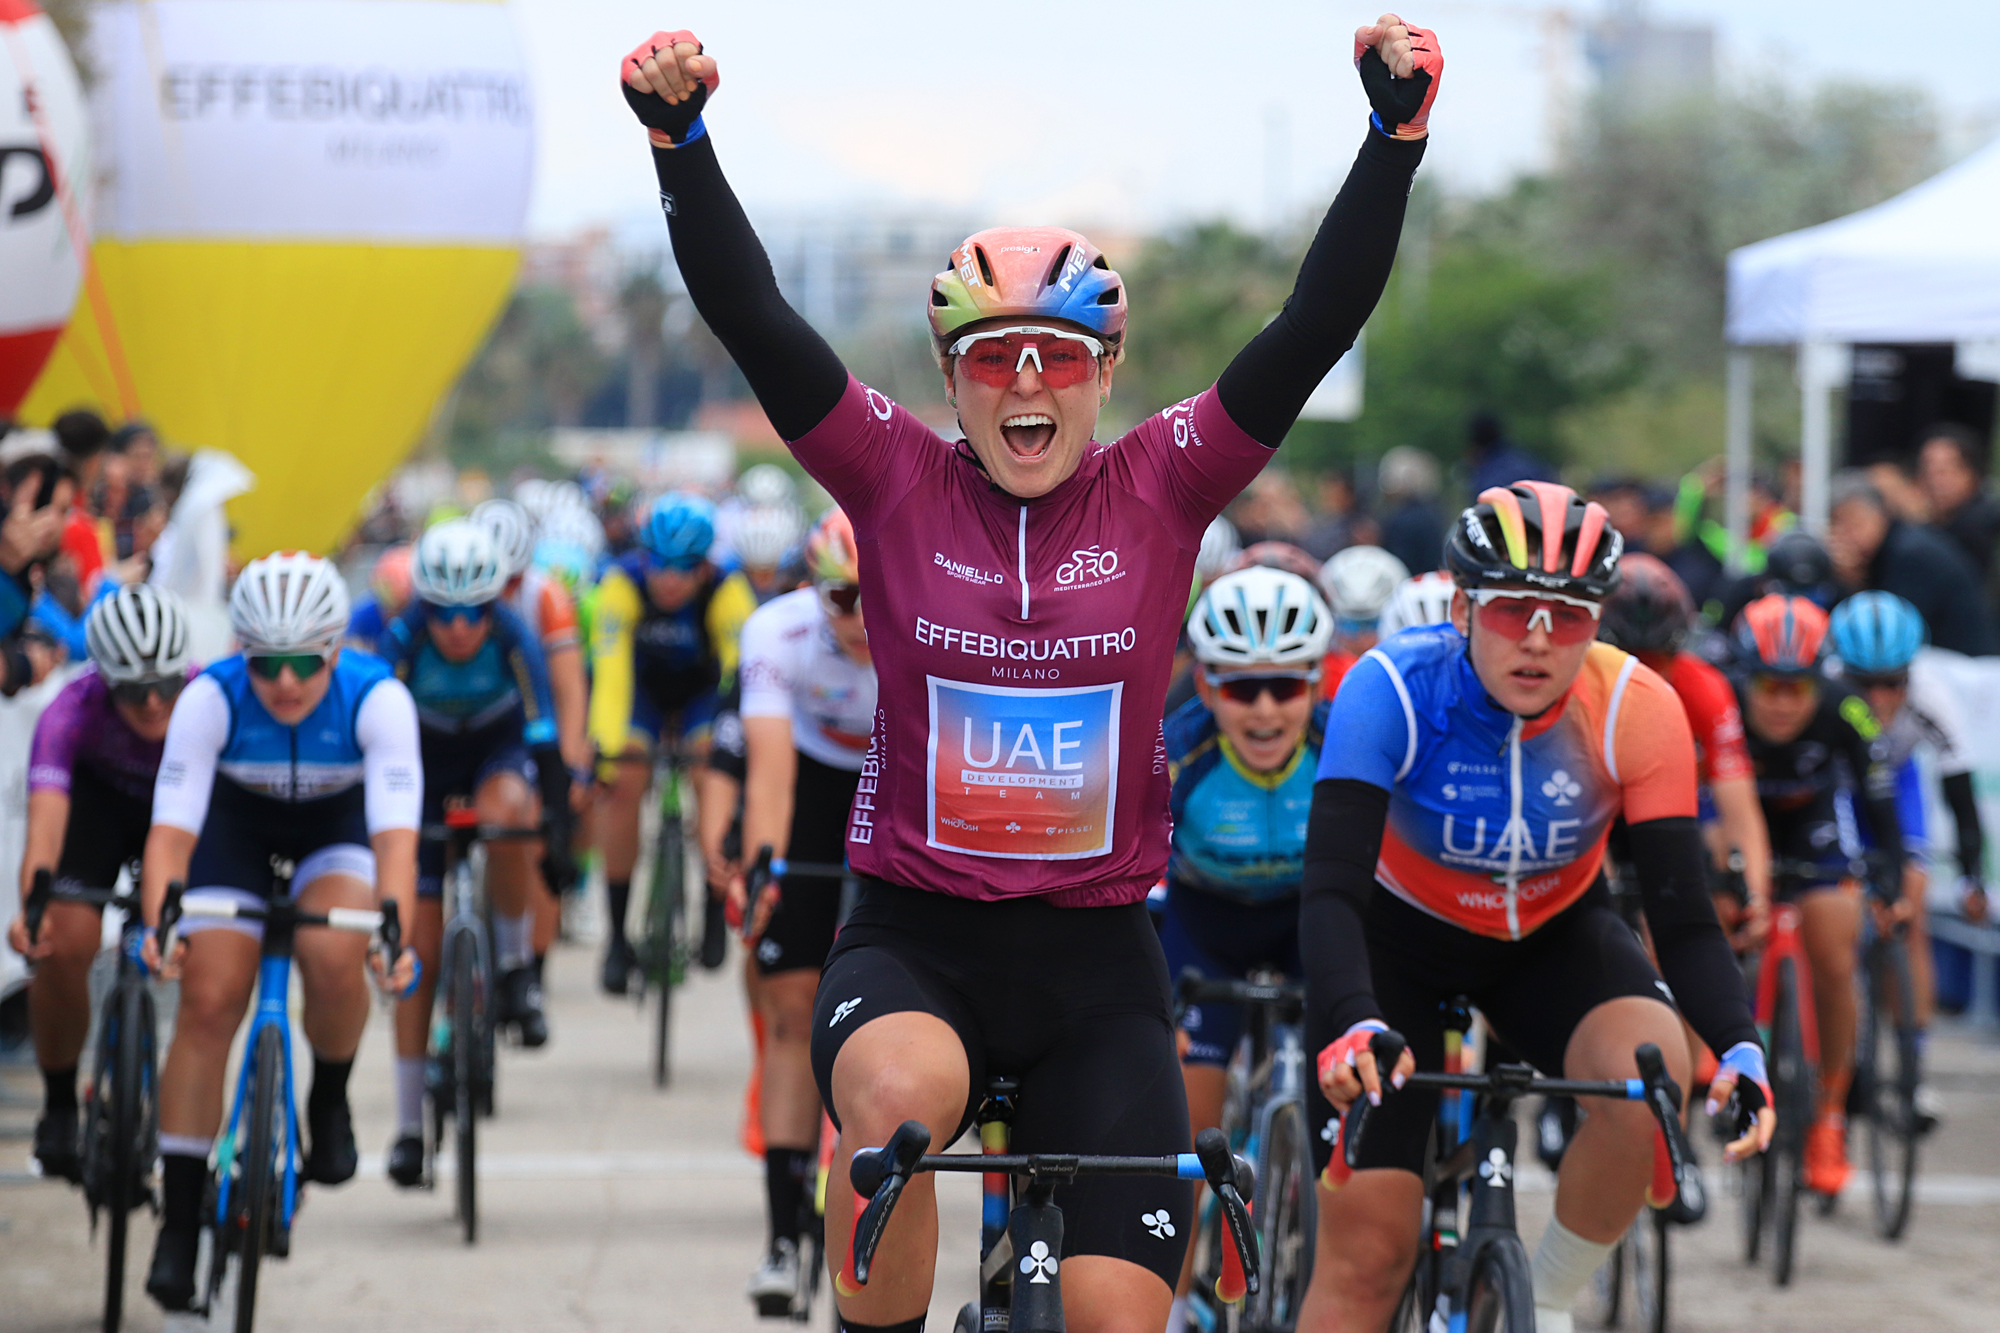 Lara Gillespie also wins the third stage of the Giro Mediterraneo in Rosa. Kumiega 2nd